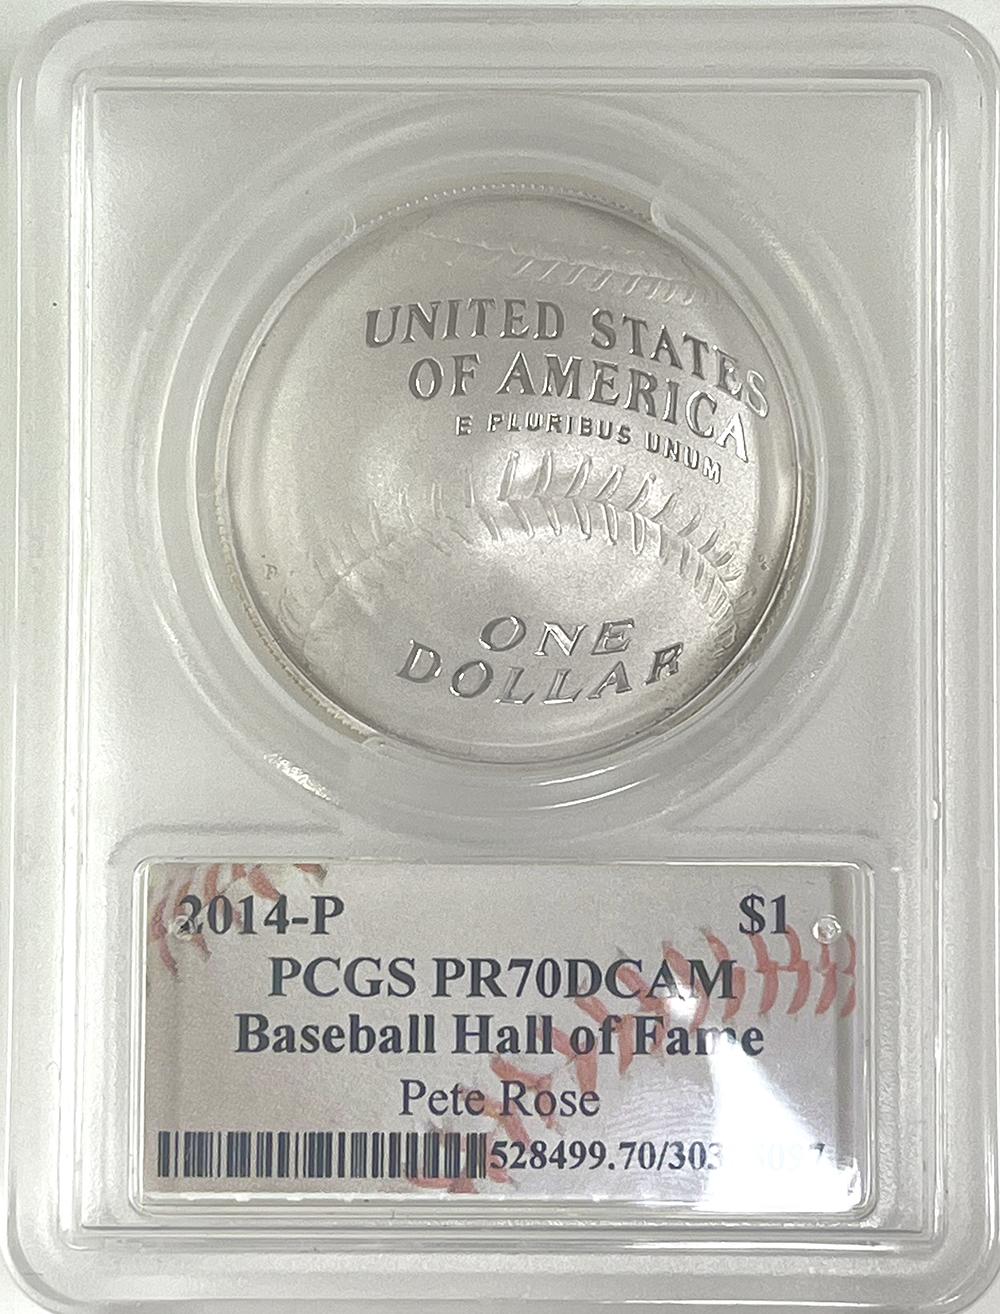 2014-P Commemorative Baseball Hall of Fame Silver Dollar, Signed by Pete Rose, NGC Certified in PR70 Deep Cameo (DCAM)